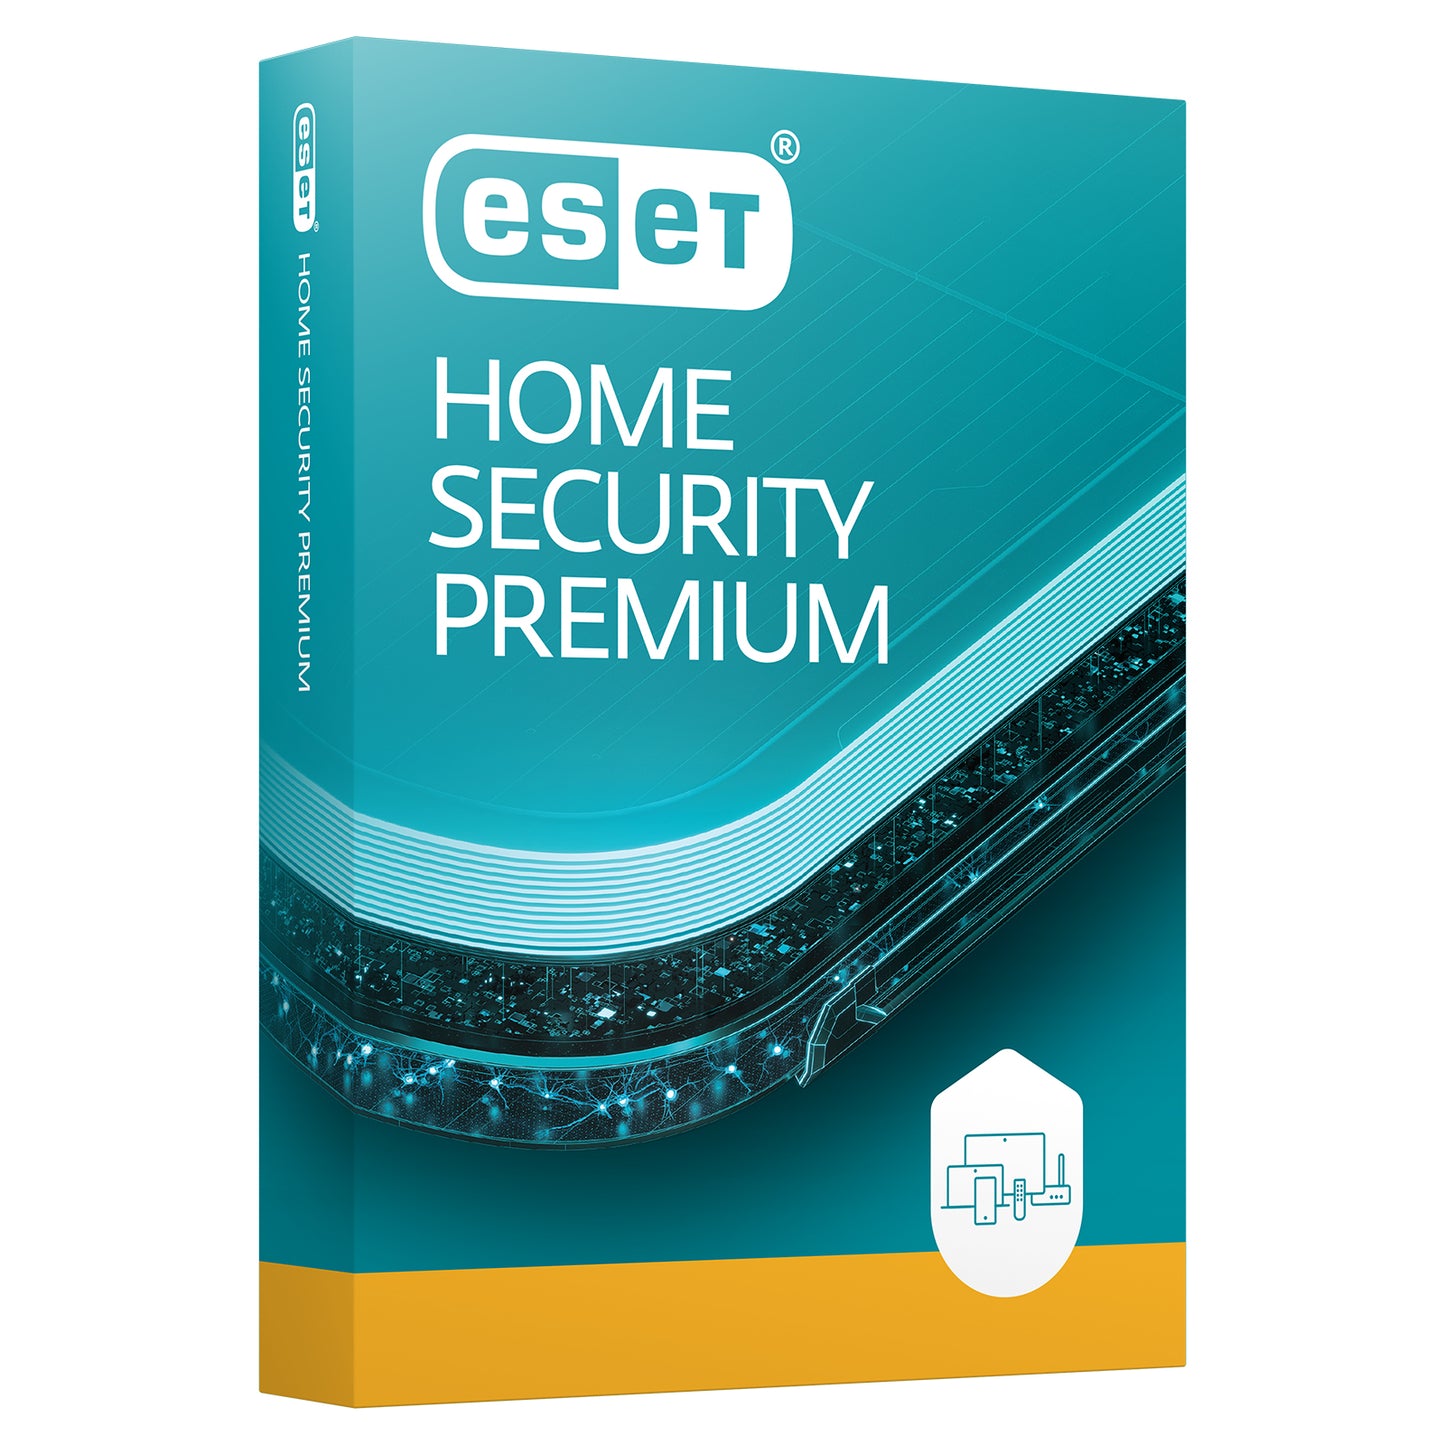 ESET Home Security Premium, 5 Devices, 1 Year